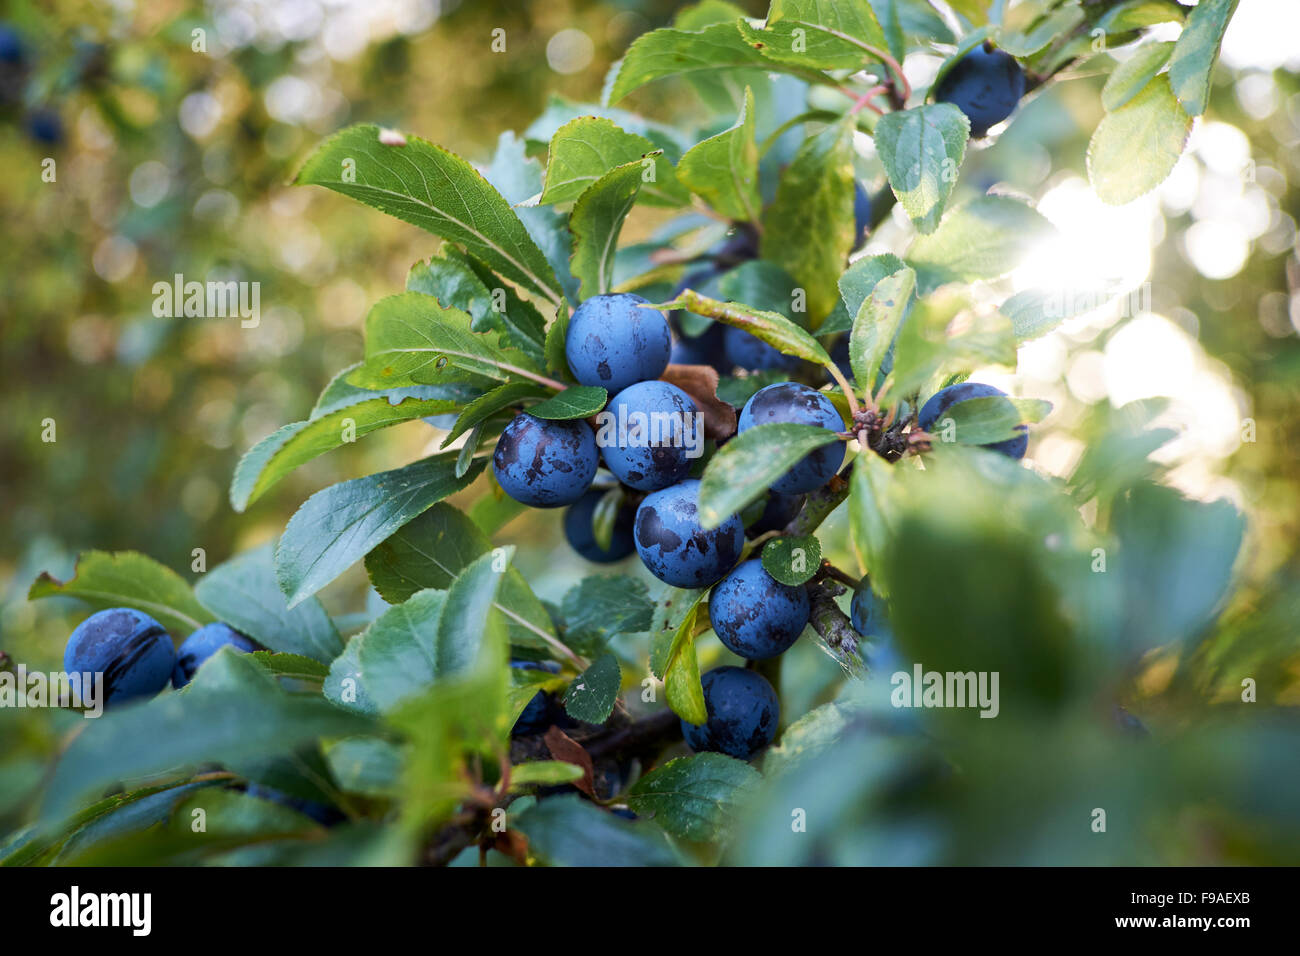 Blackthorn (Prunus spinosa) in fruit with sloes. Stock Photo